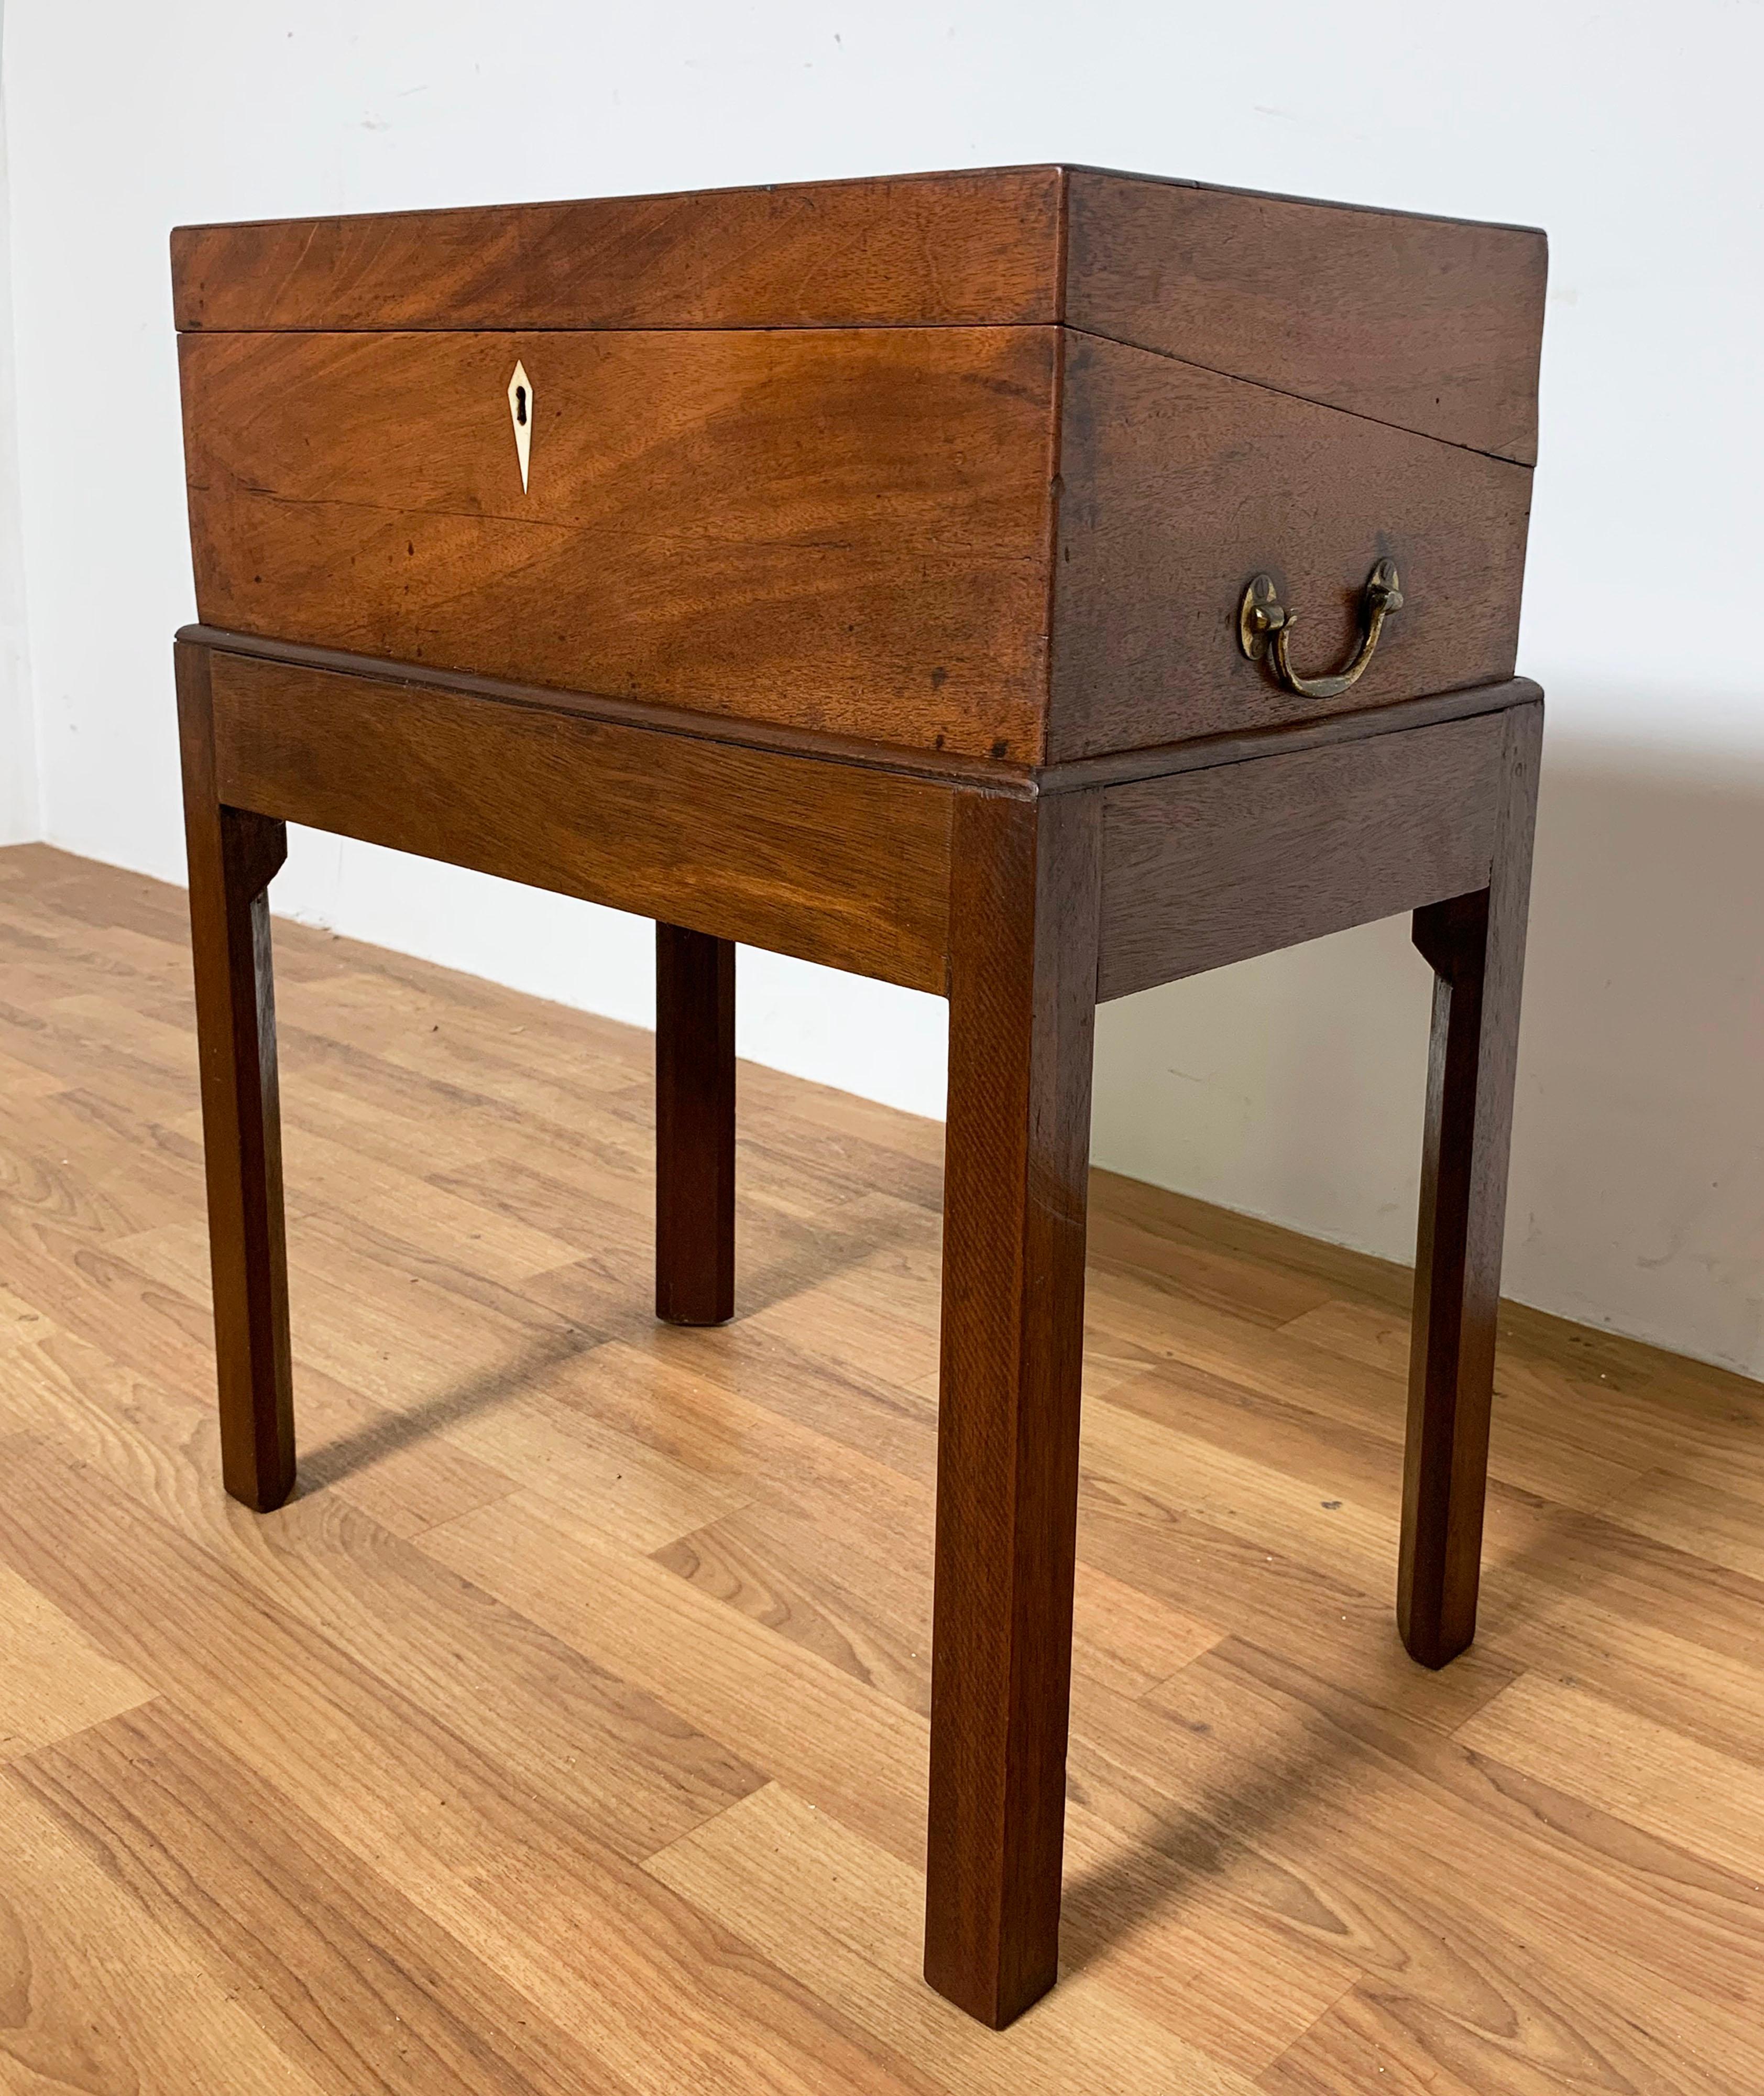 An early 19th Century English lap desk on stand, can be used as an elegant side table.

On stand, measures 22